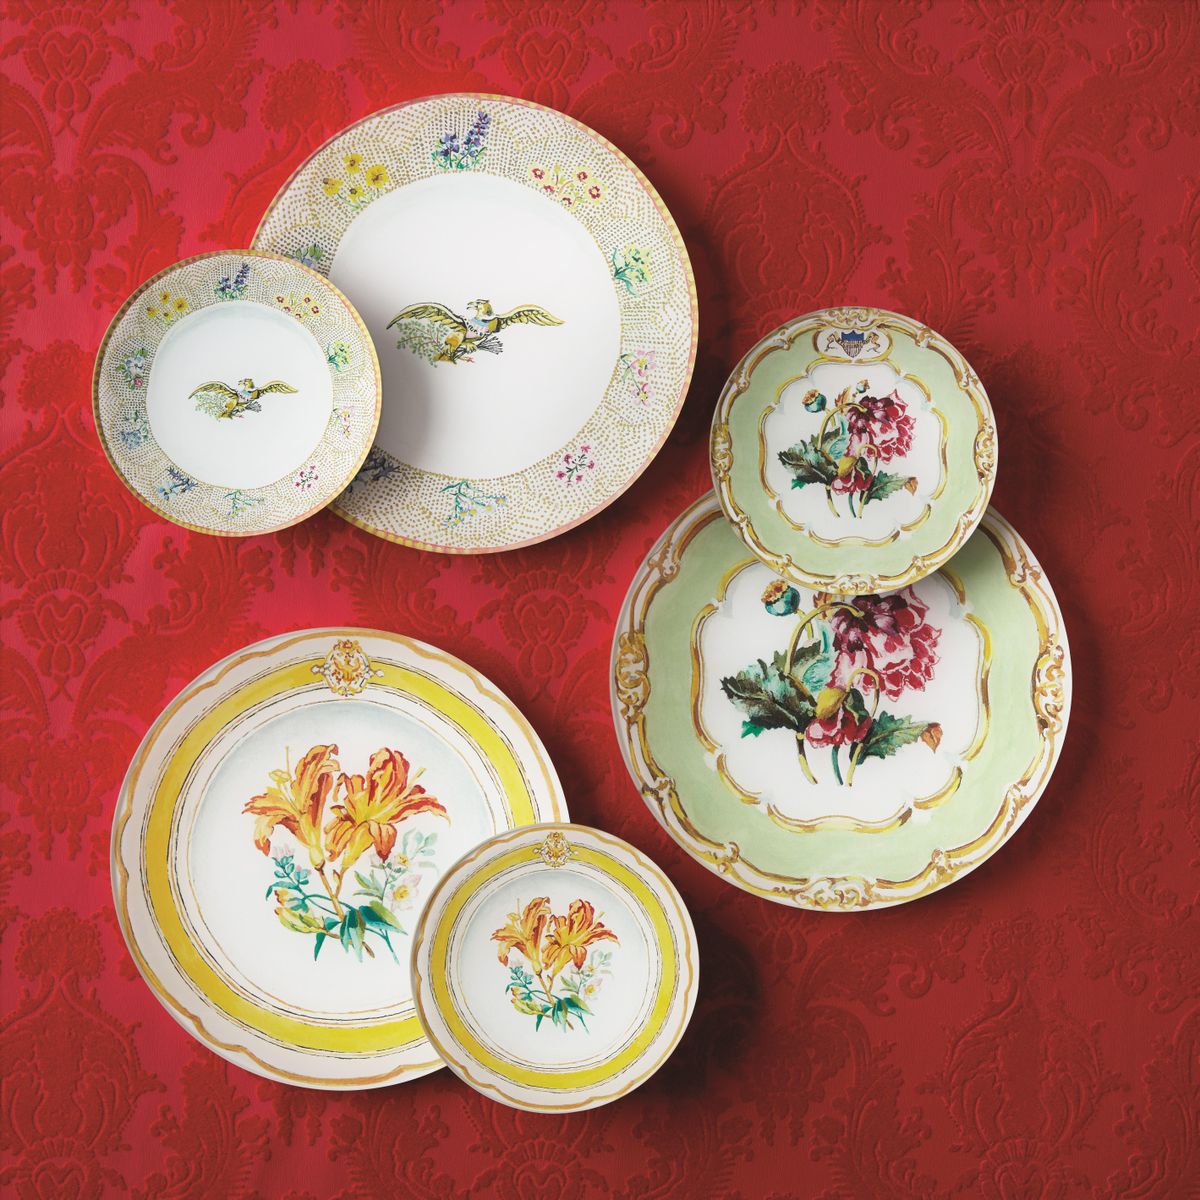 A collection of glass decoupage plates inspired by official White House china sets is a collaboration between designer John Derian and artist Katharine Barnwell for the White House Historical Association. Six different presidential patterns are included. Clockwise from top: Johnson, Polk and Grant. (White House Historical Associati / White House Historical Association)